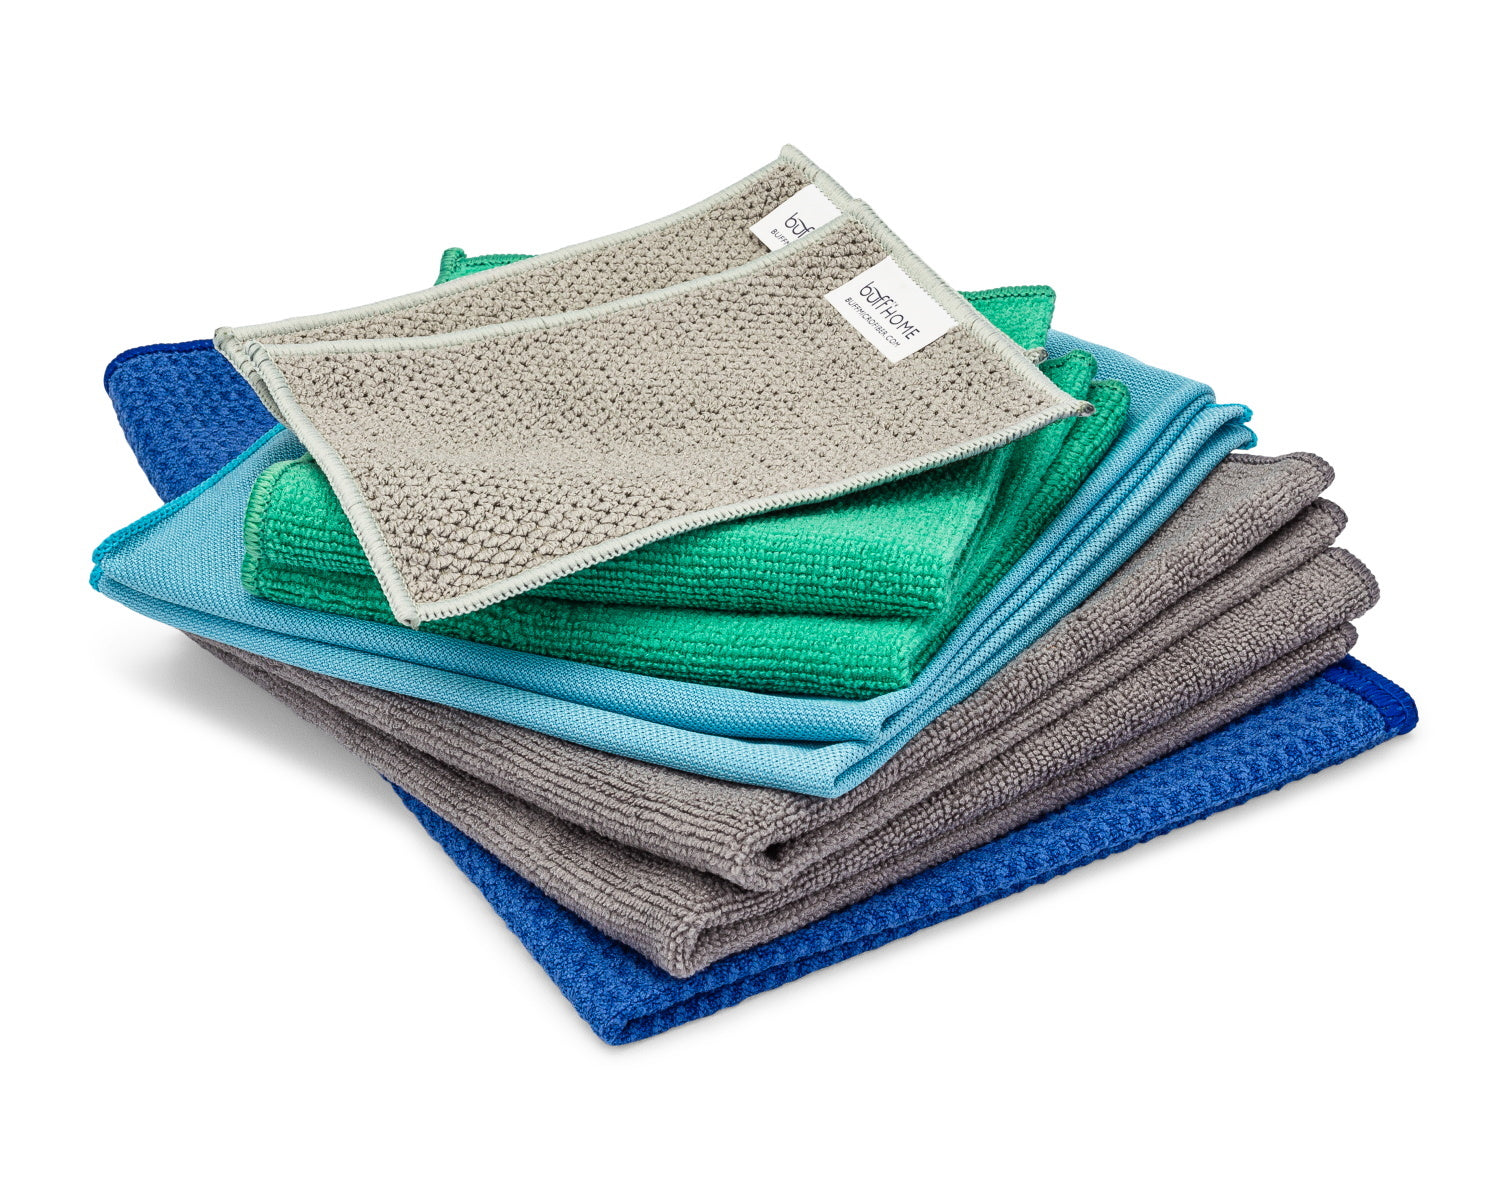 Norwex - Your microfiber cloths can clean up some BIG messes. You